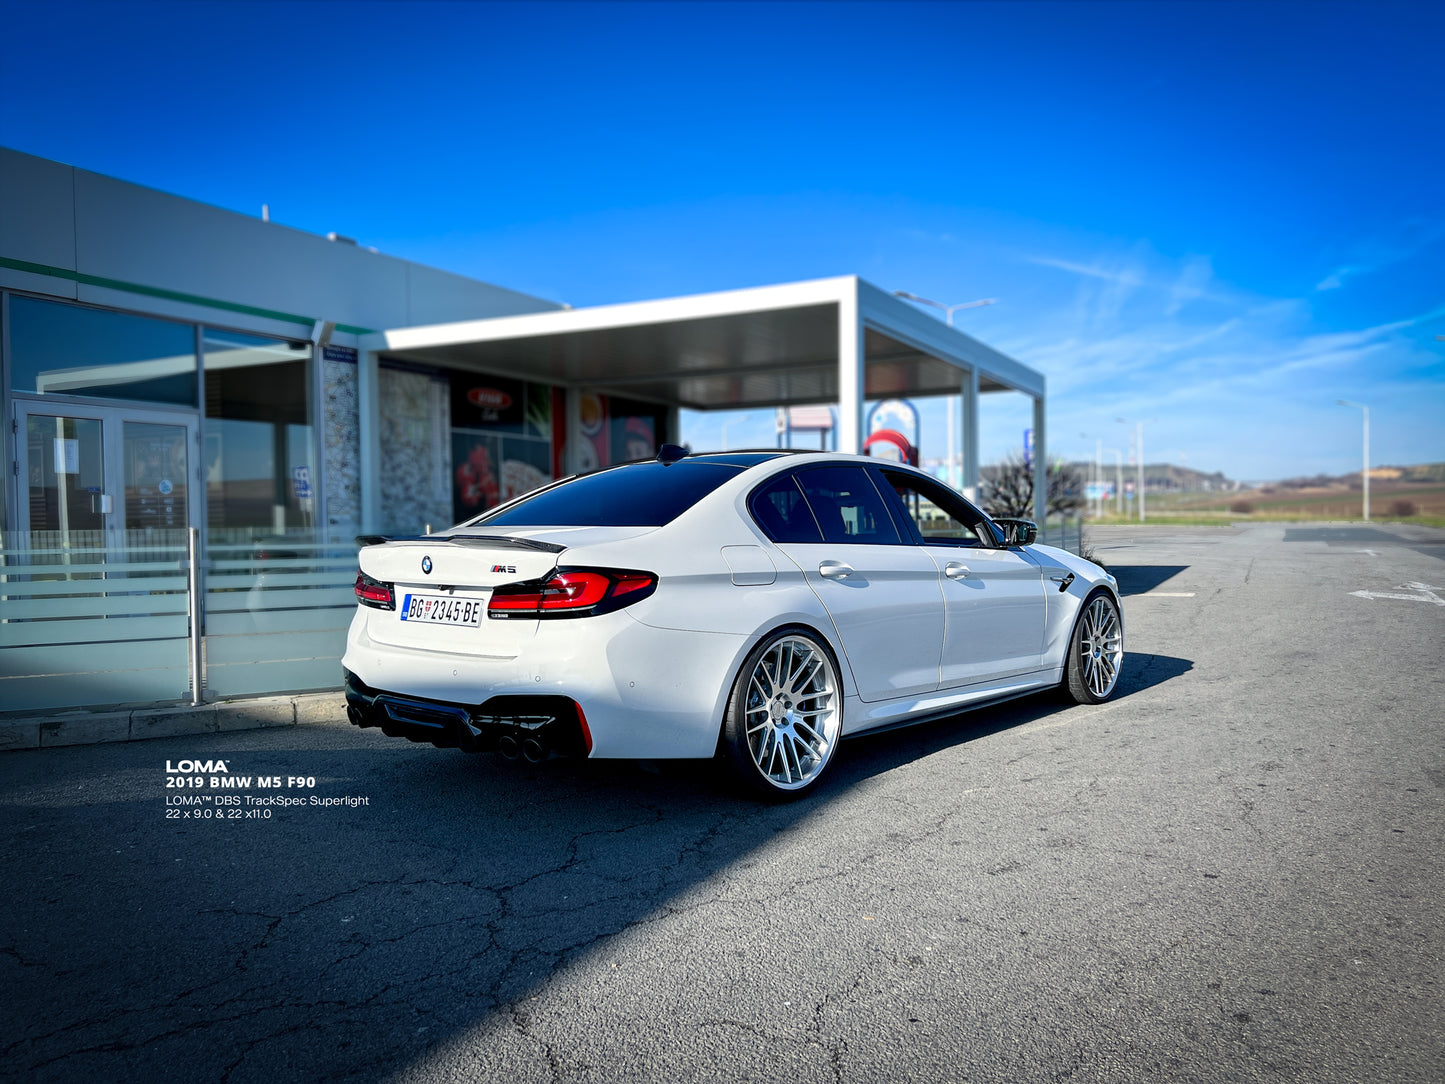 Custom BMW M5 F90 with GTC Competition rims